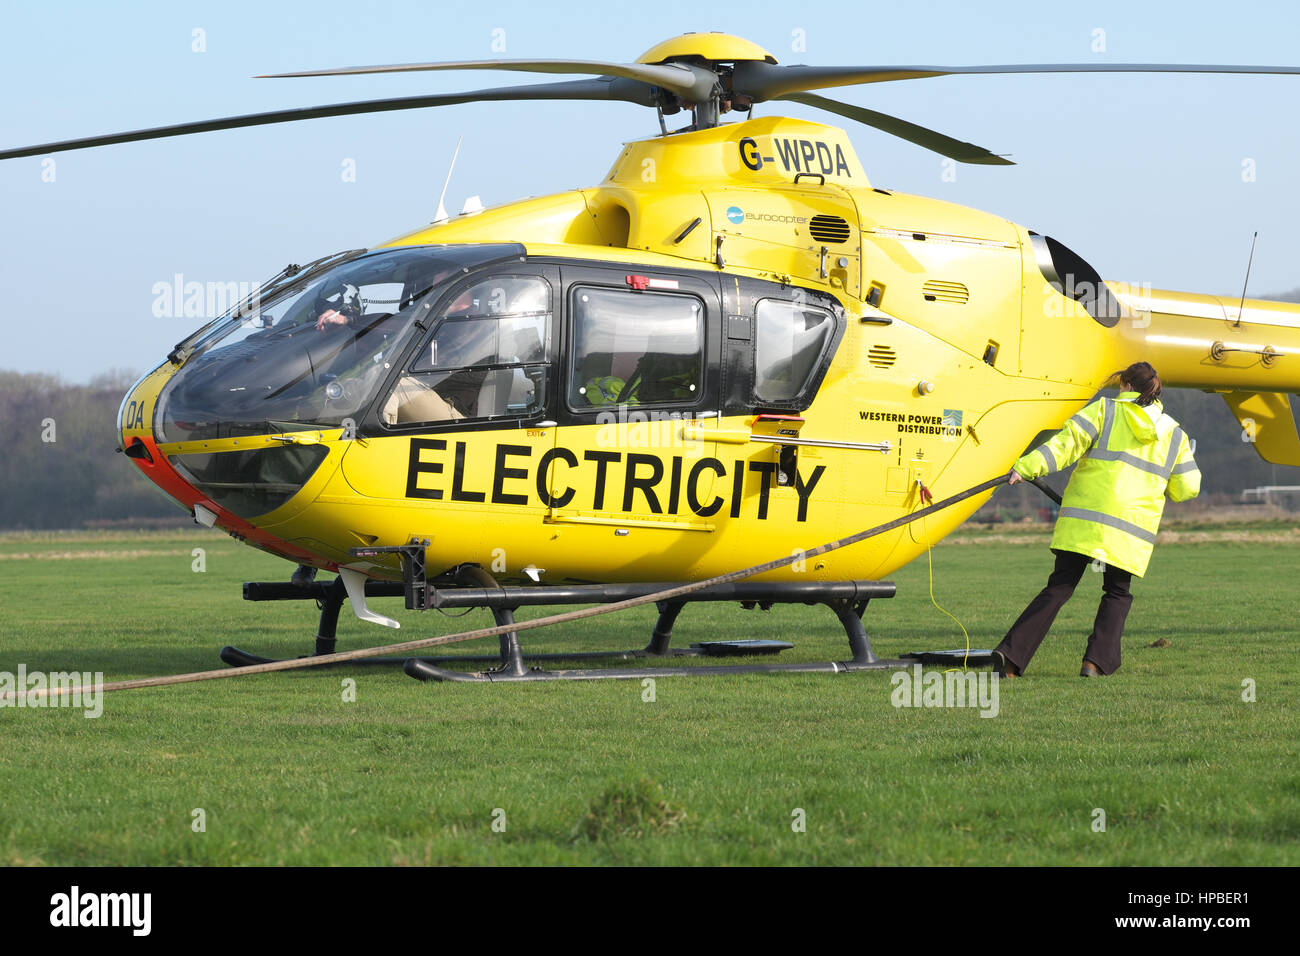 Eurocopter EC 135 helicopter used for electricity power supply  checking by Western Power Distribution WPD in UK being refueled Stock Photo